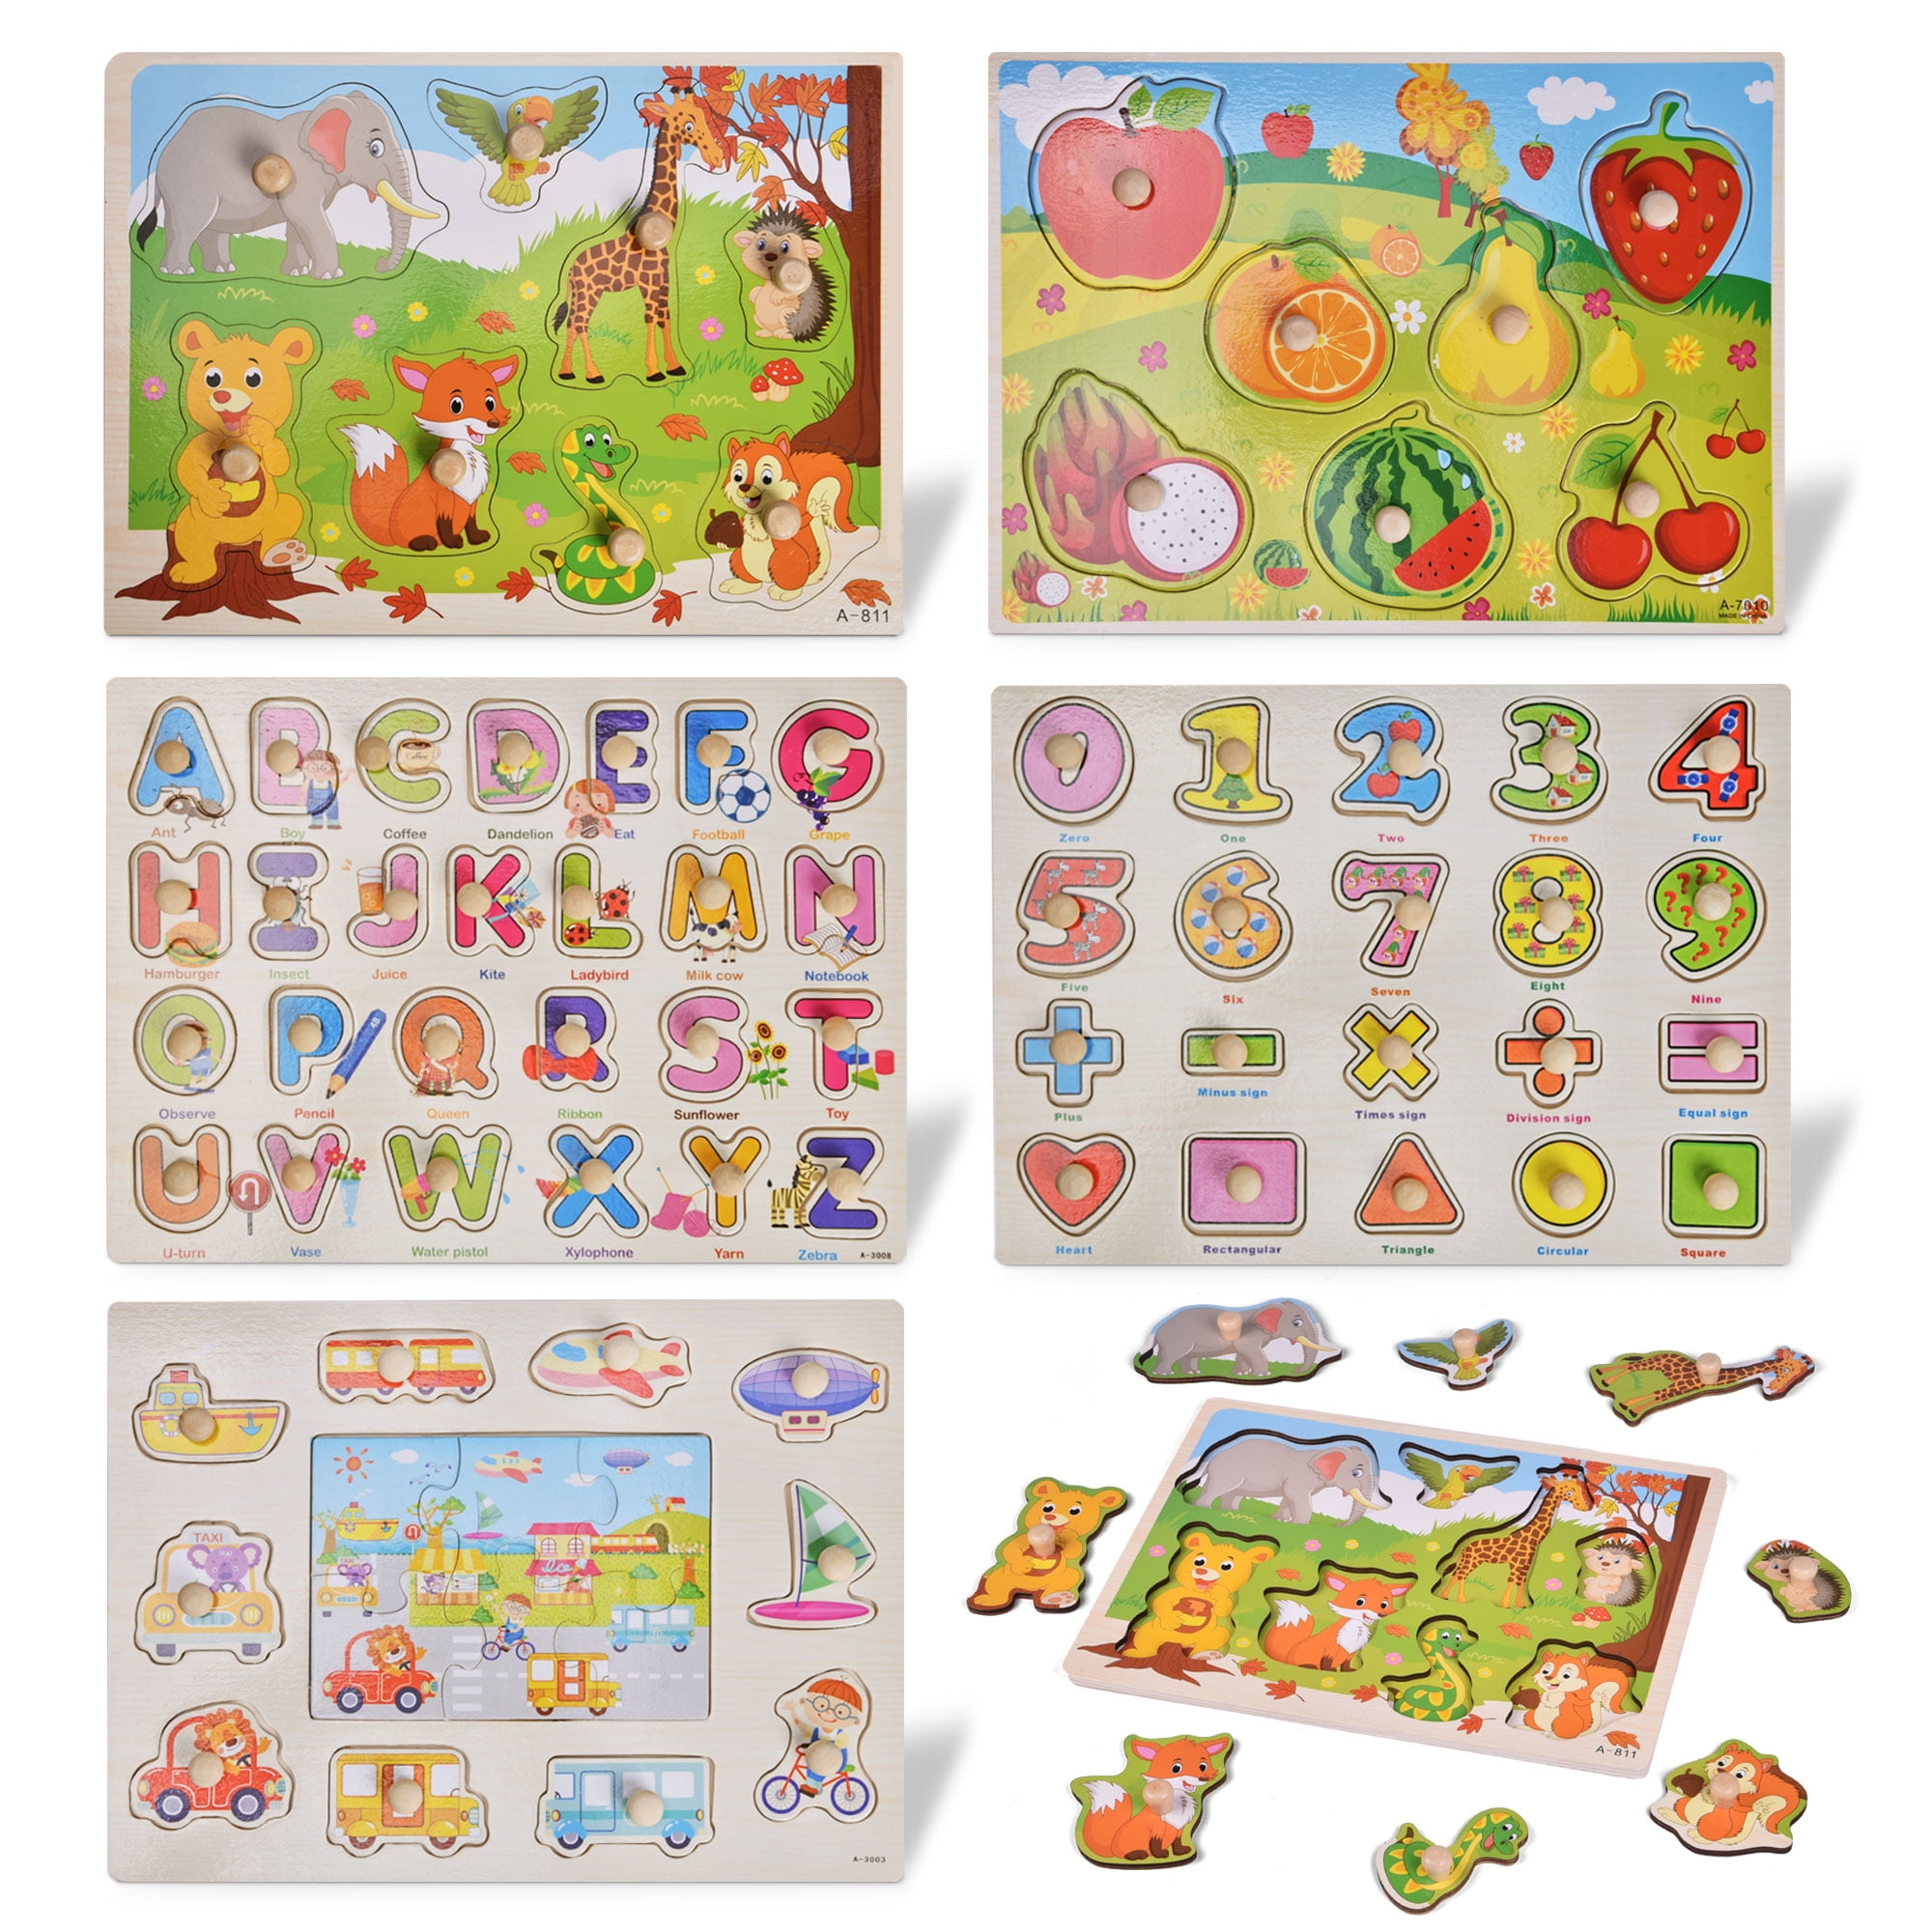 Wooden puppy jigsaw/puzzle with numbers and letters,colorful educational toy 